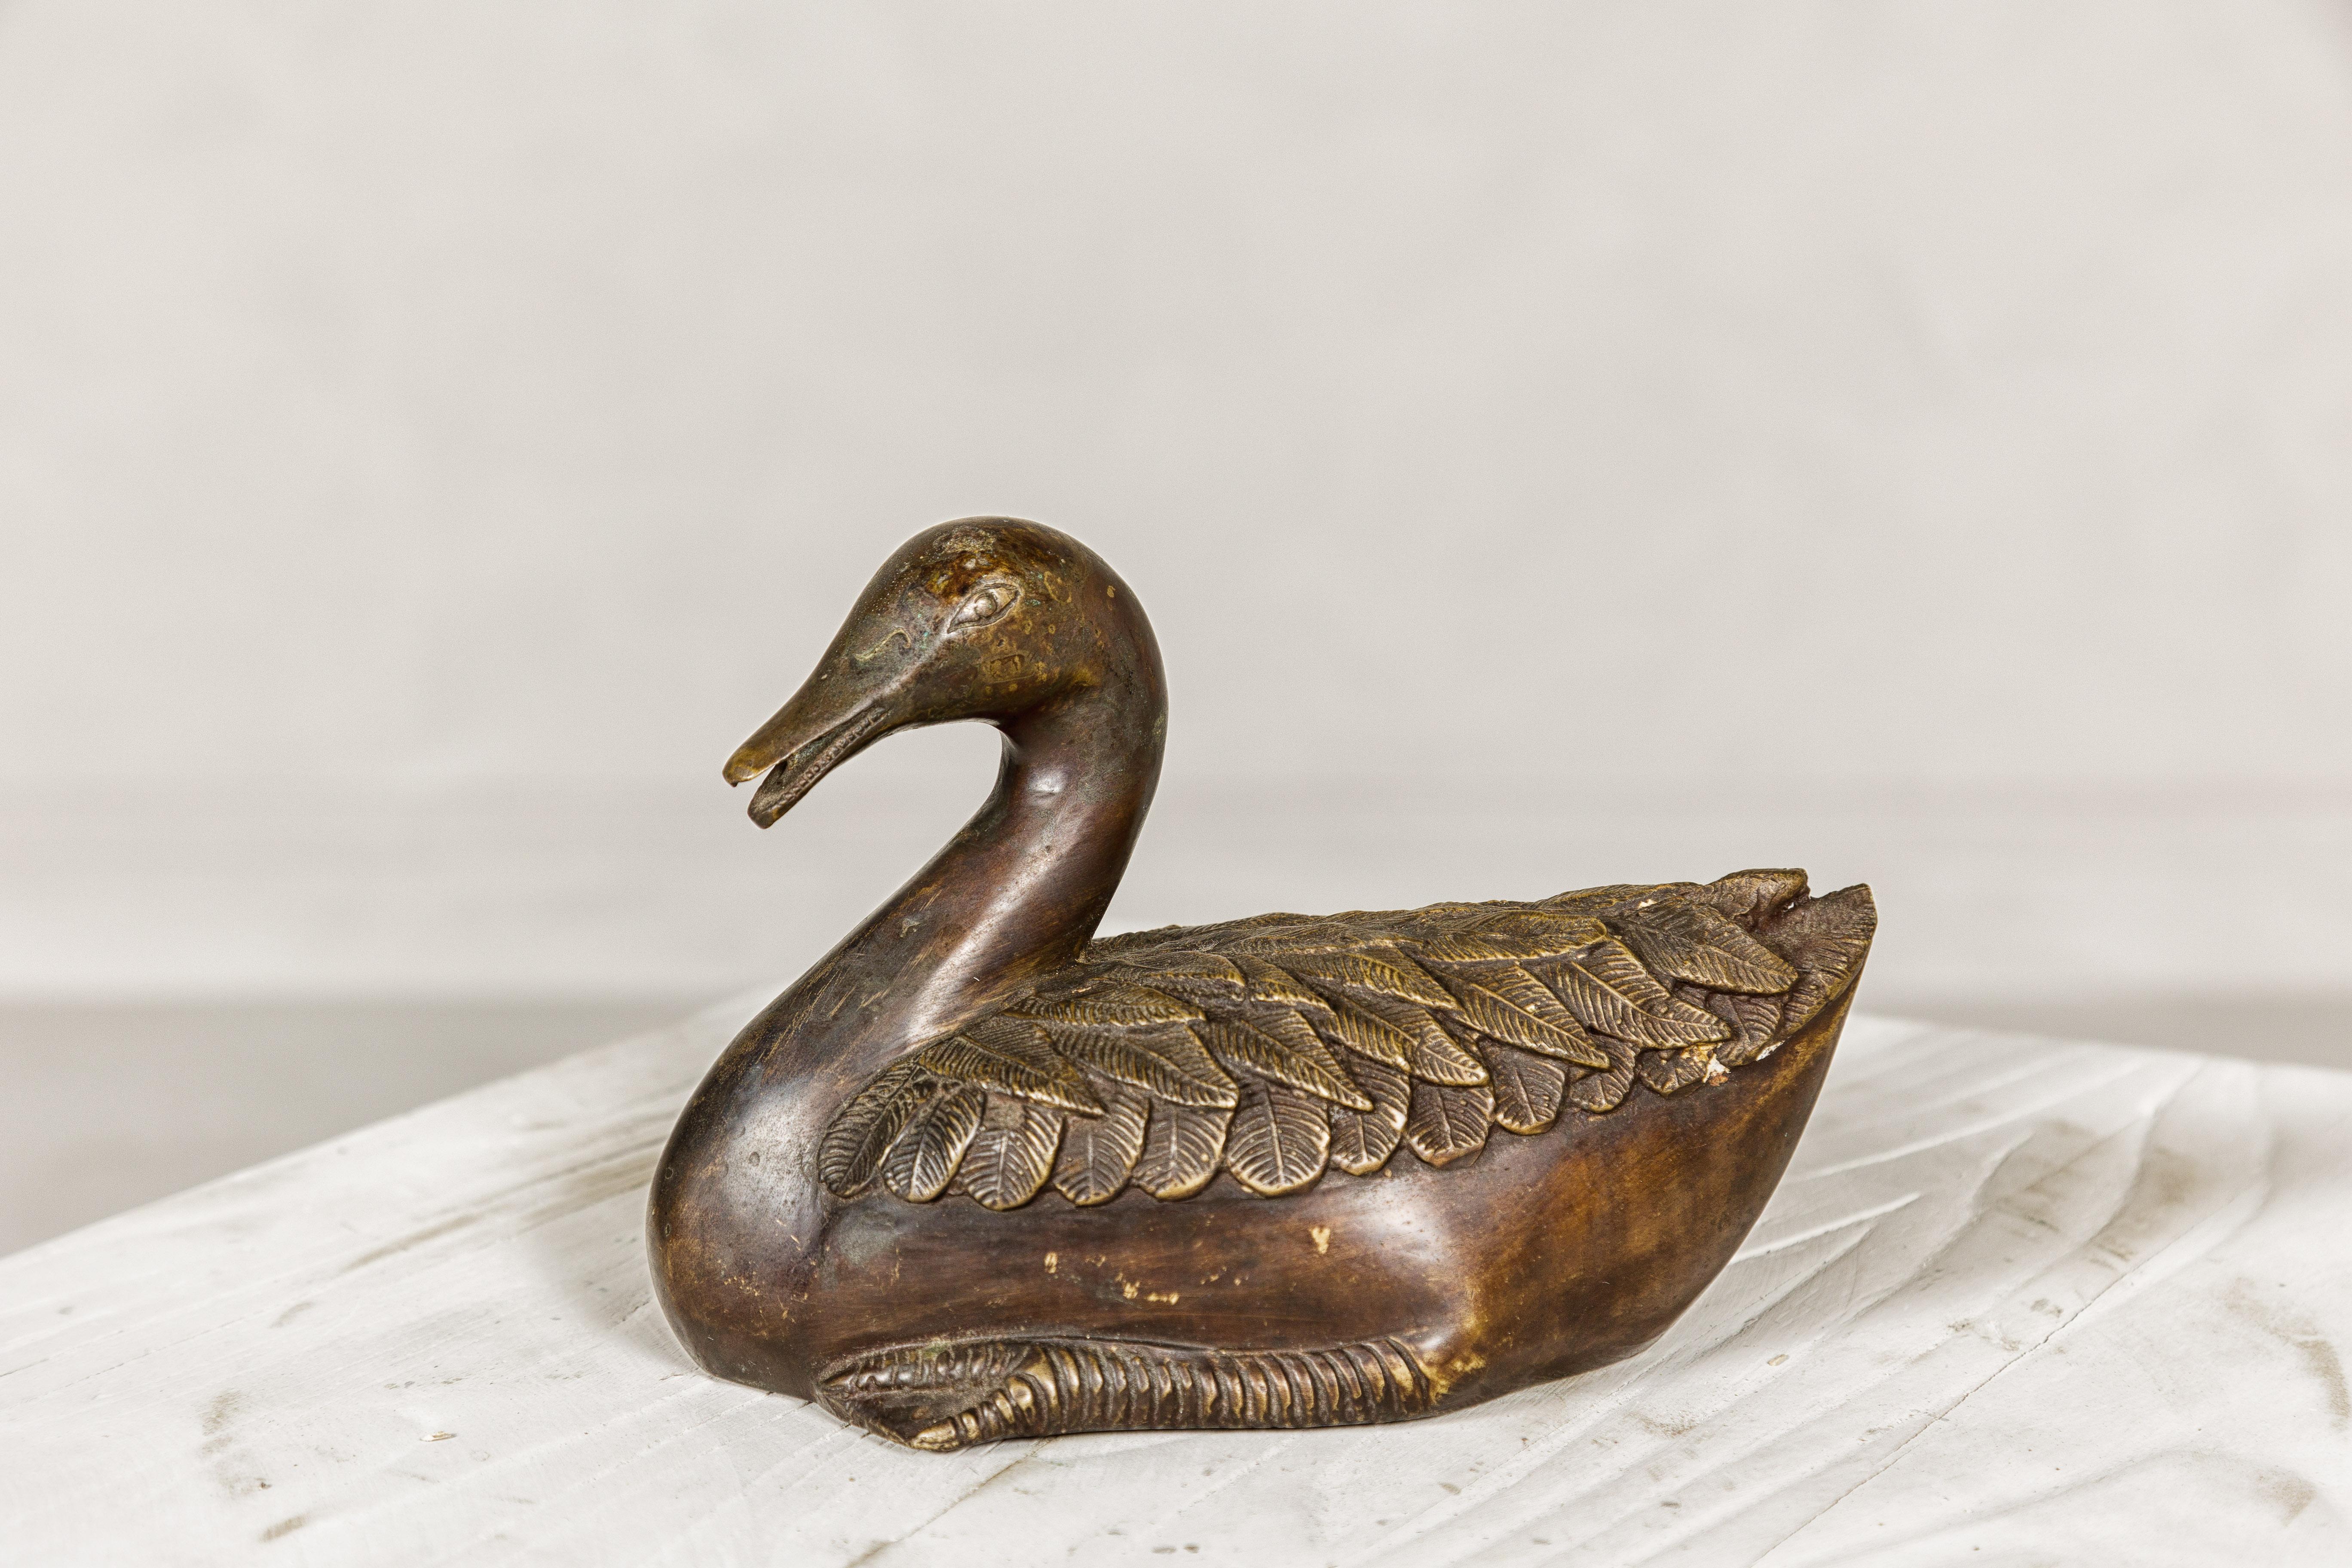 This vintage bronze duck tabletop statuette is a charming and intricately detailed piece, showcasing the exquisite craftsmanship of the lost wax process. The fine details on the feathers are a testament to the meticulous work involved in its